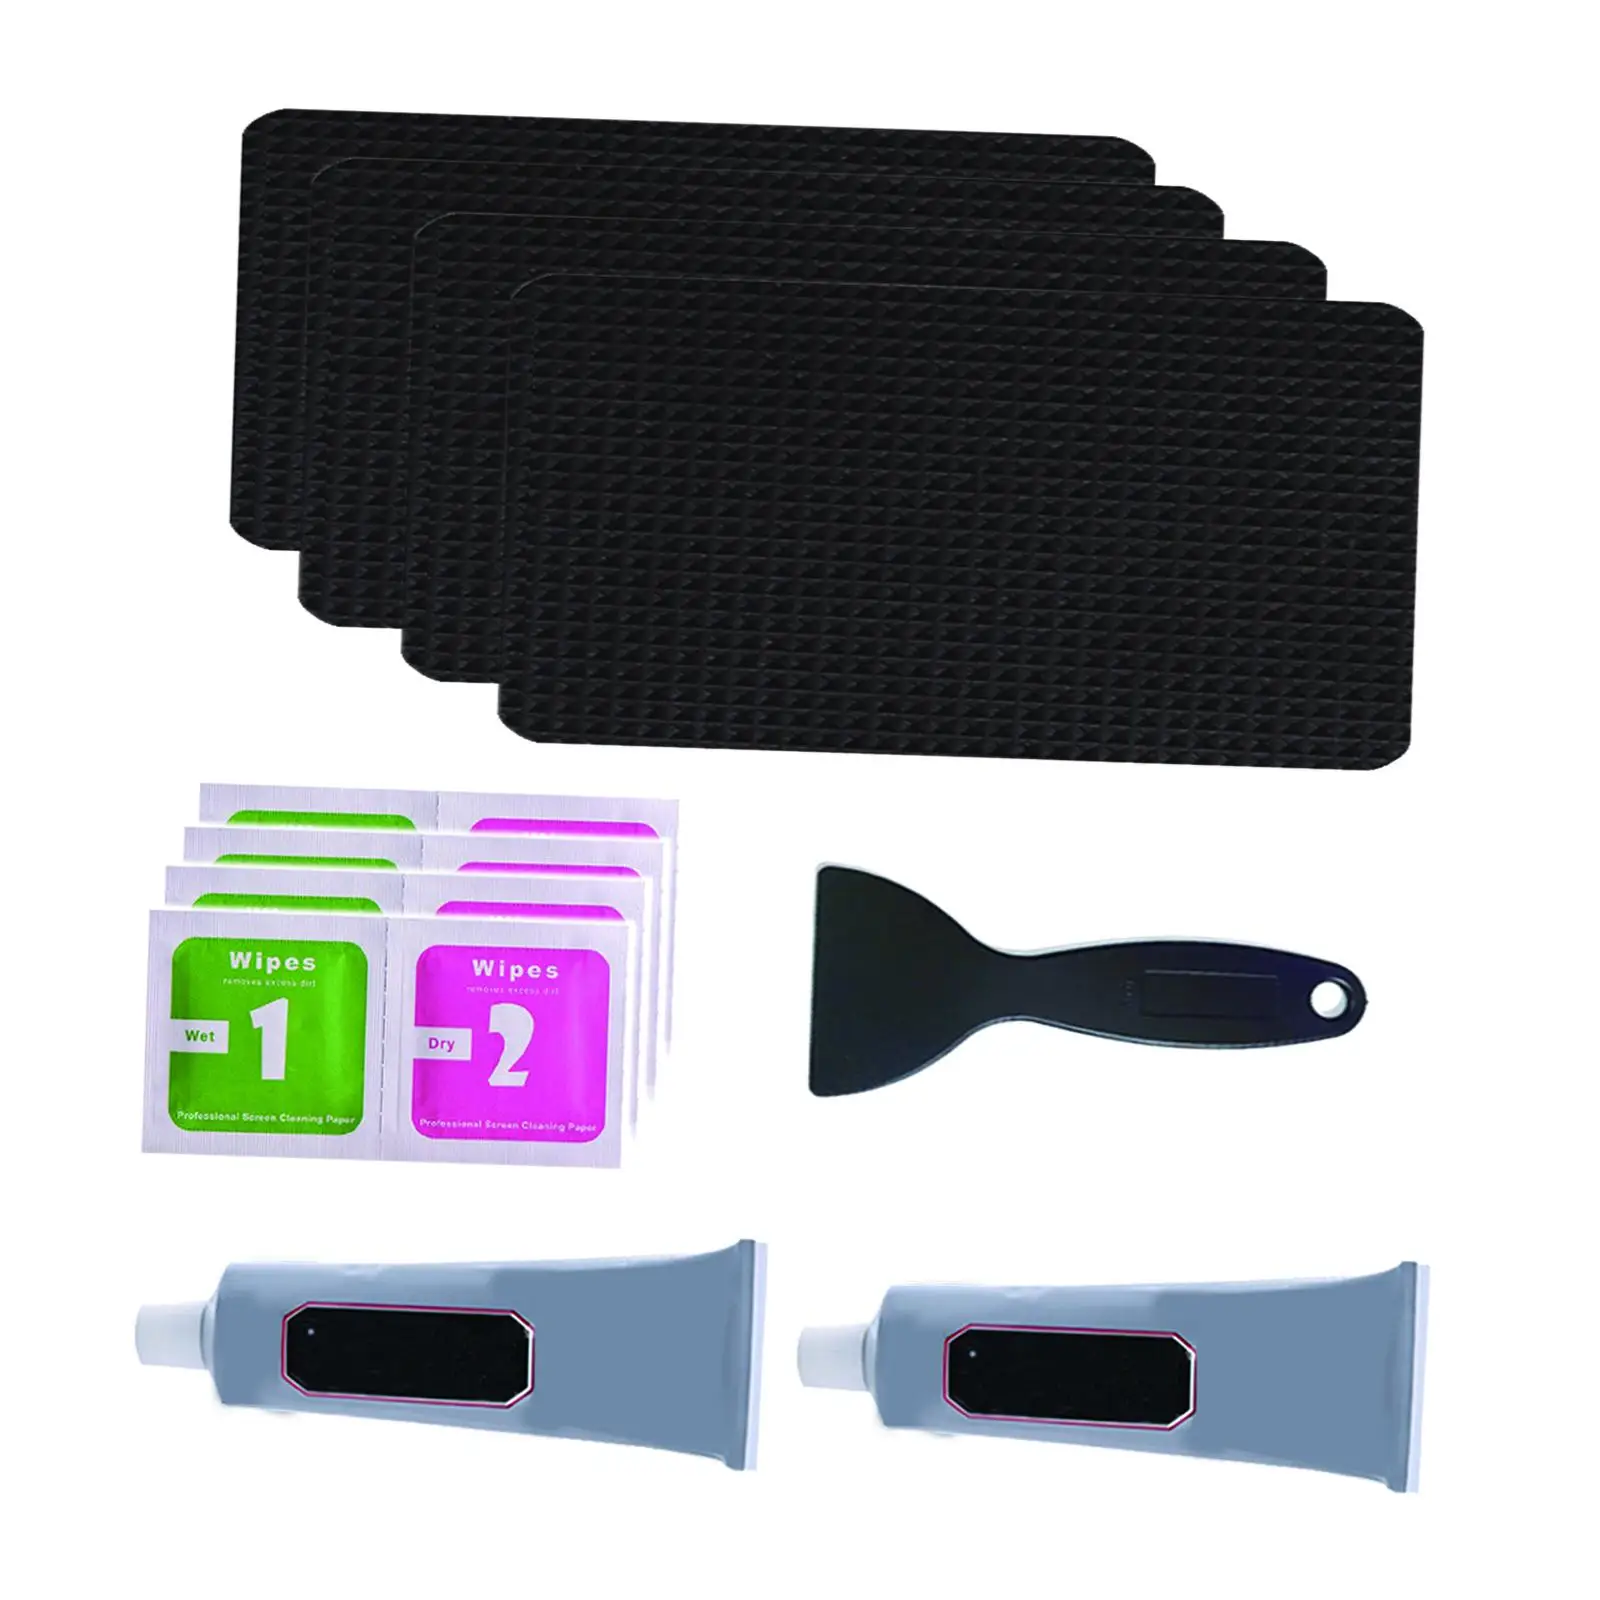 Trampoline Repair Kit Trampoline Replacement Mat Rectangular on Patches Repairing Tools for Outdoor Tent